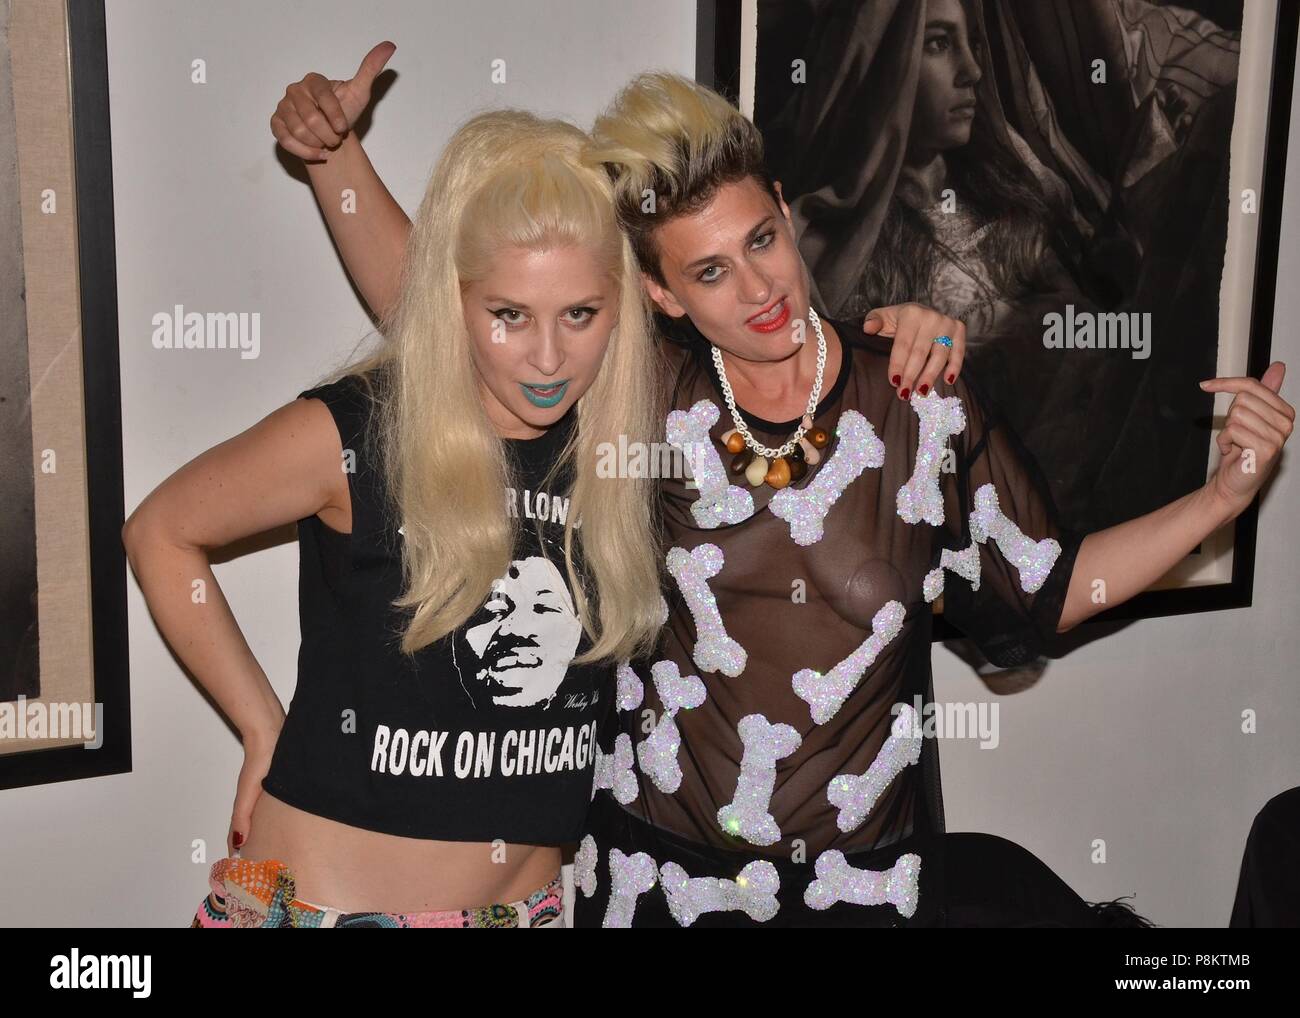 Hollywood, California, USA. 16th May, 2015. JESIKA VON RABBIT and PEACHES attands 'What Else Is In The Teaches of Peaches' World Premiere Book Signing At La Luz de Jesus Gallery In Hollywood. Credit: Billy Bennight/ZUMA Wire/Alamy Live News Stock Photo